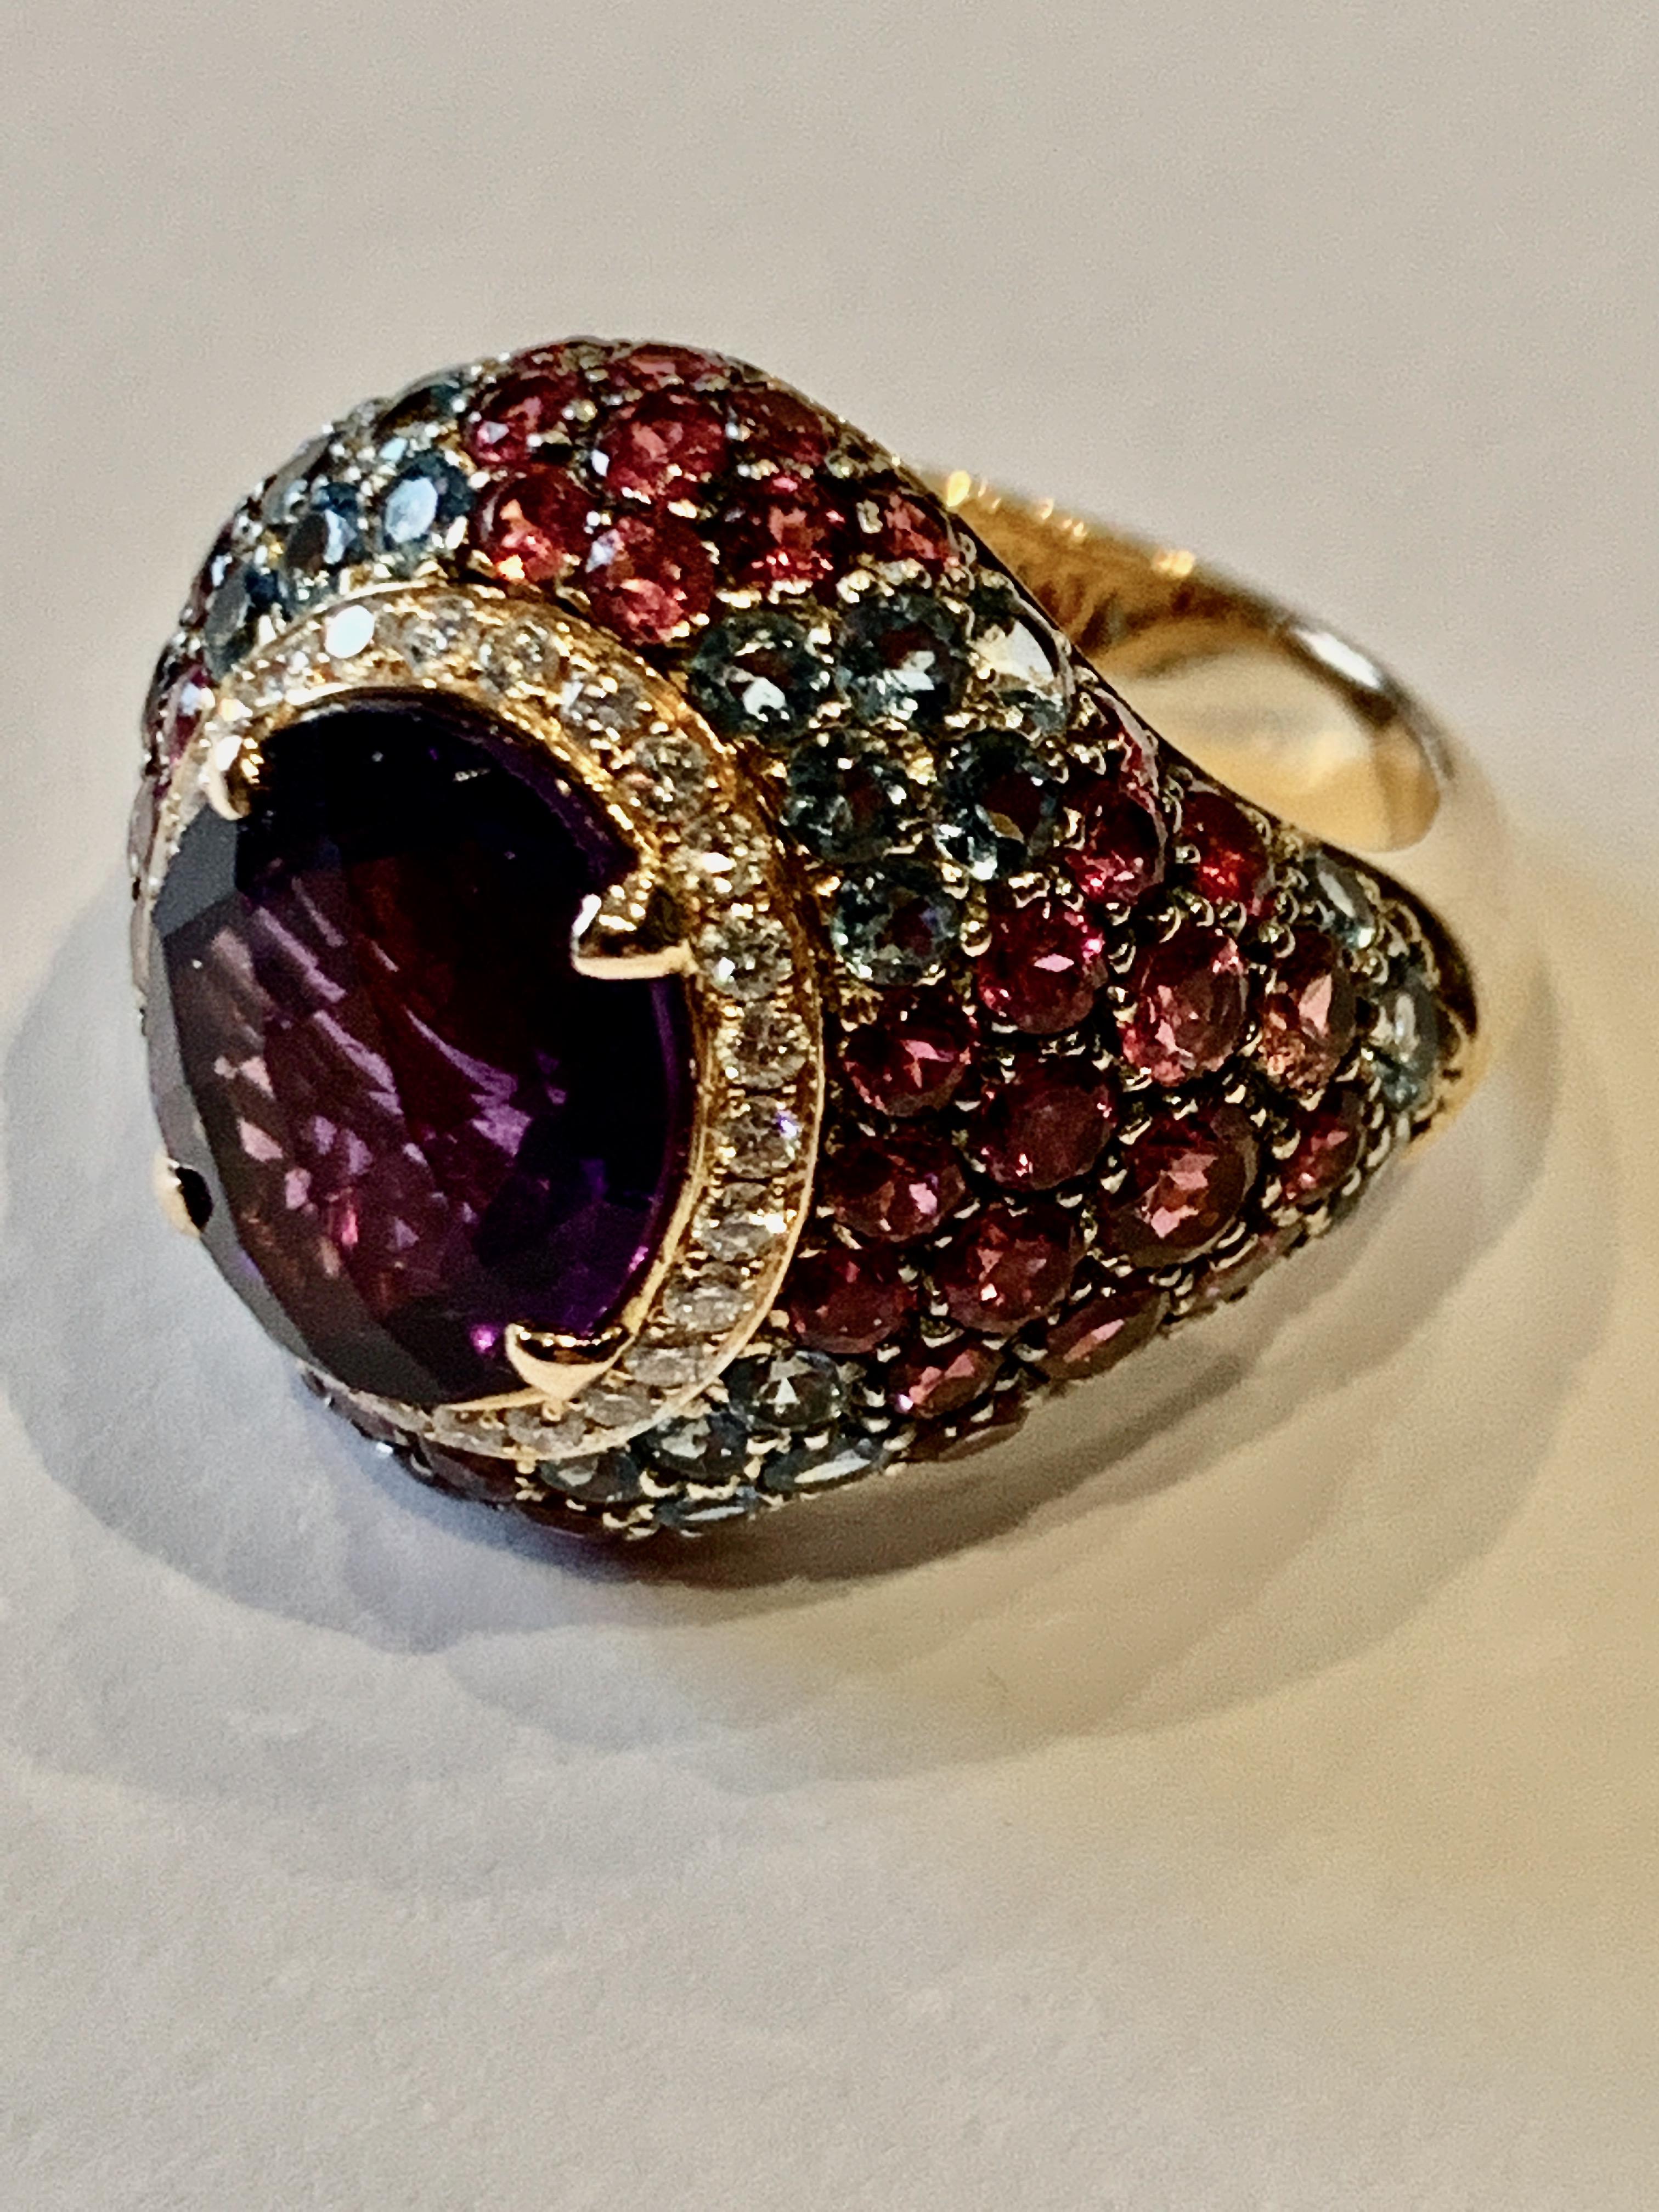 A feminine oval cut amethyst encircled by a delicate ring of brilliant cut diamonds surrounded by a pave set dome of vibrant rubellites and aquamarines.

Details
Amethyst Cocktail Ring with Rubellite, Aquamarine and Diamond
- 18 karat Rose Gold
-